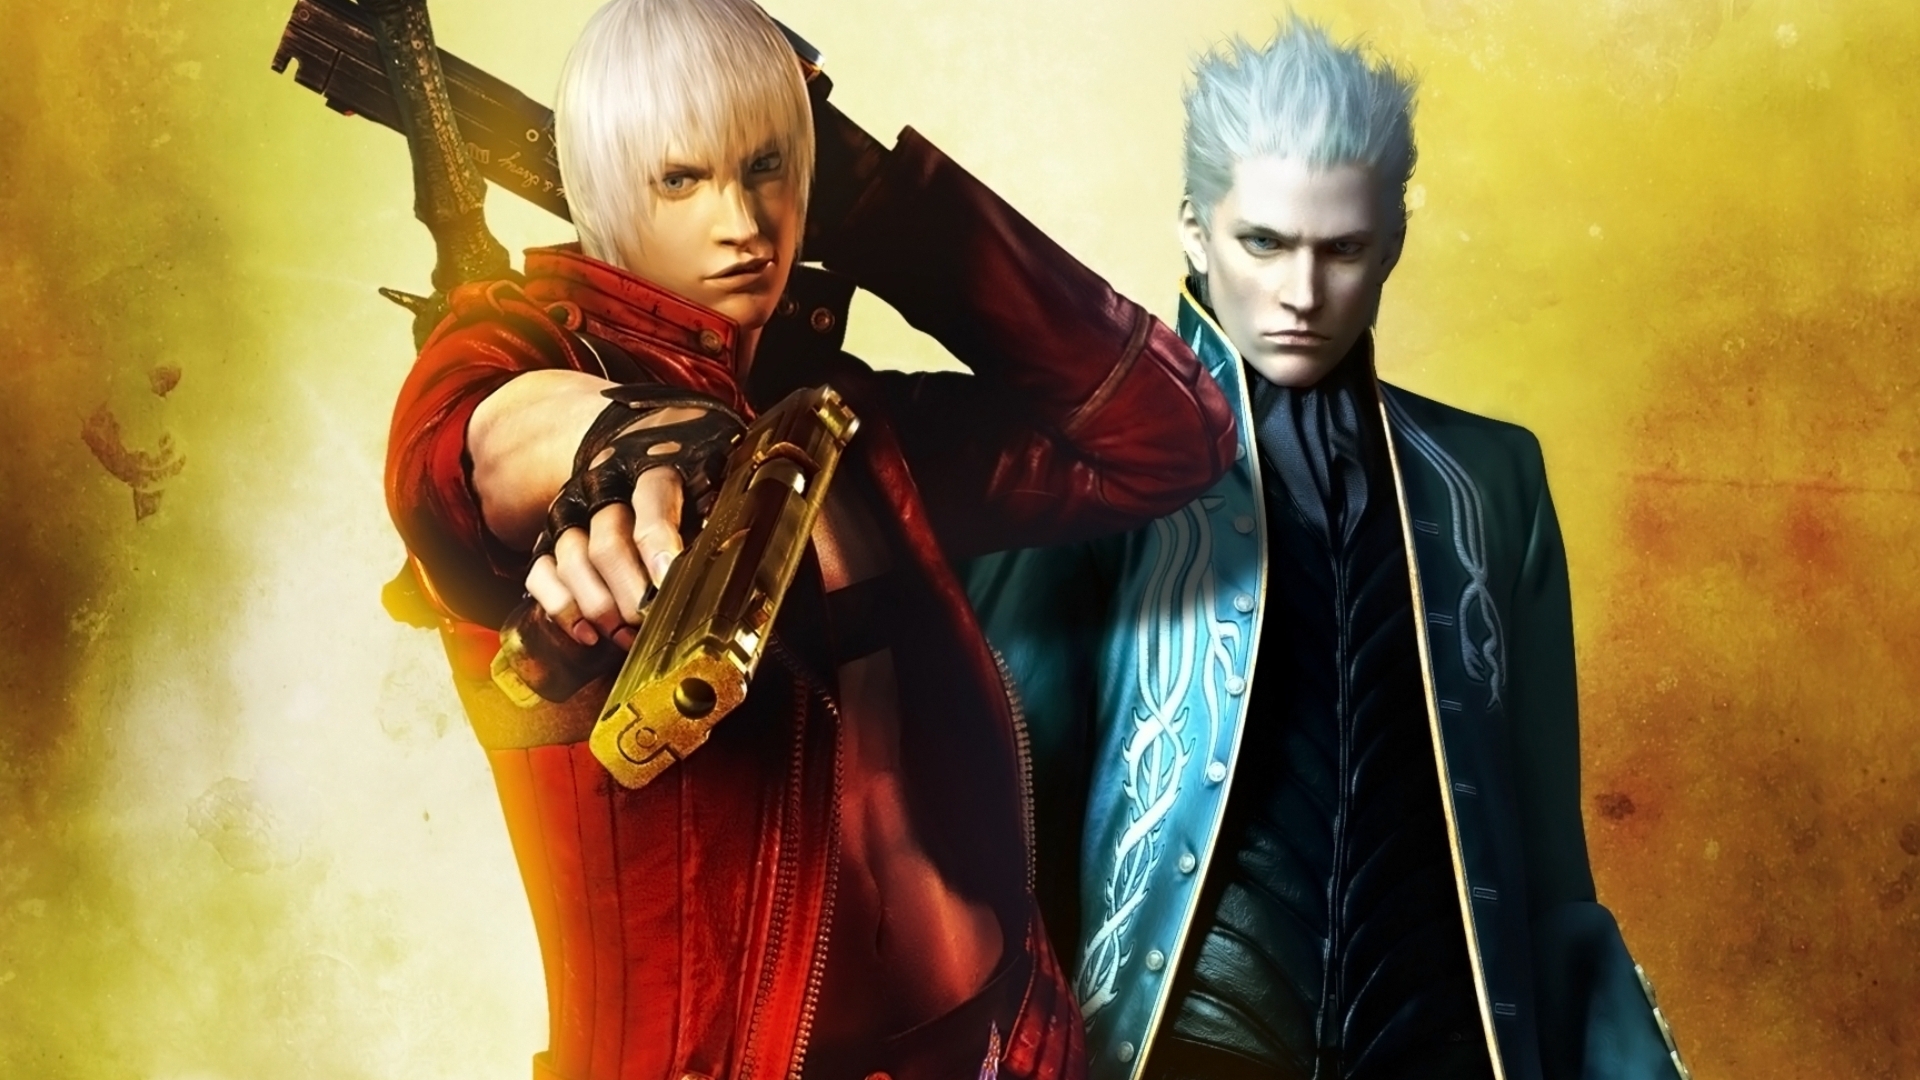 Devil may cry 3 for 1920 x 1080 HDTV 1080p resolution